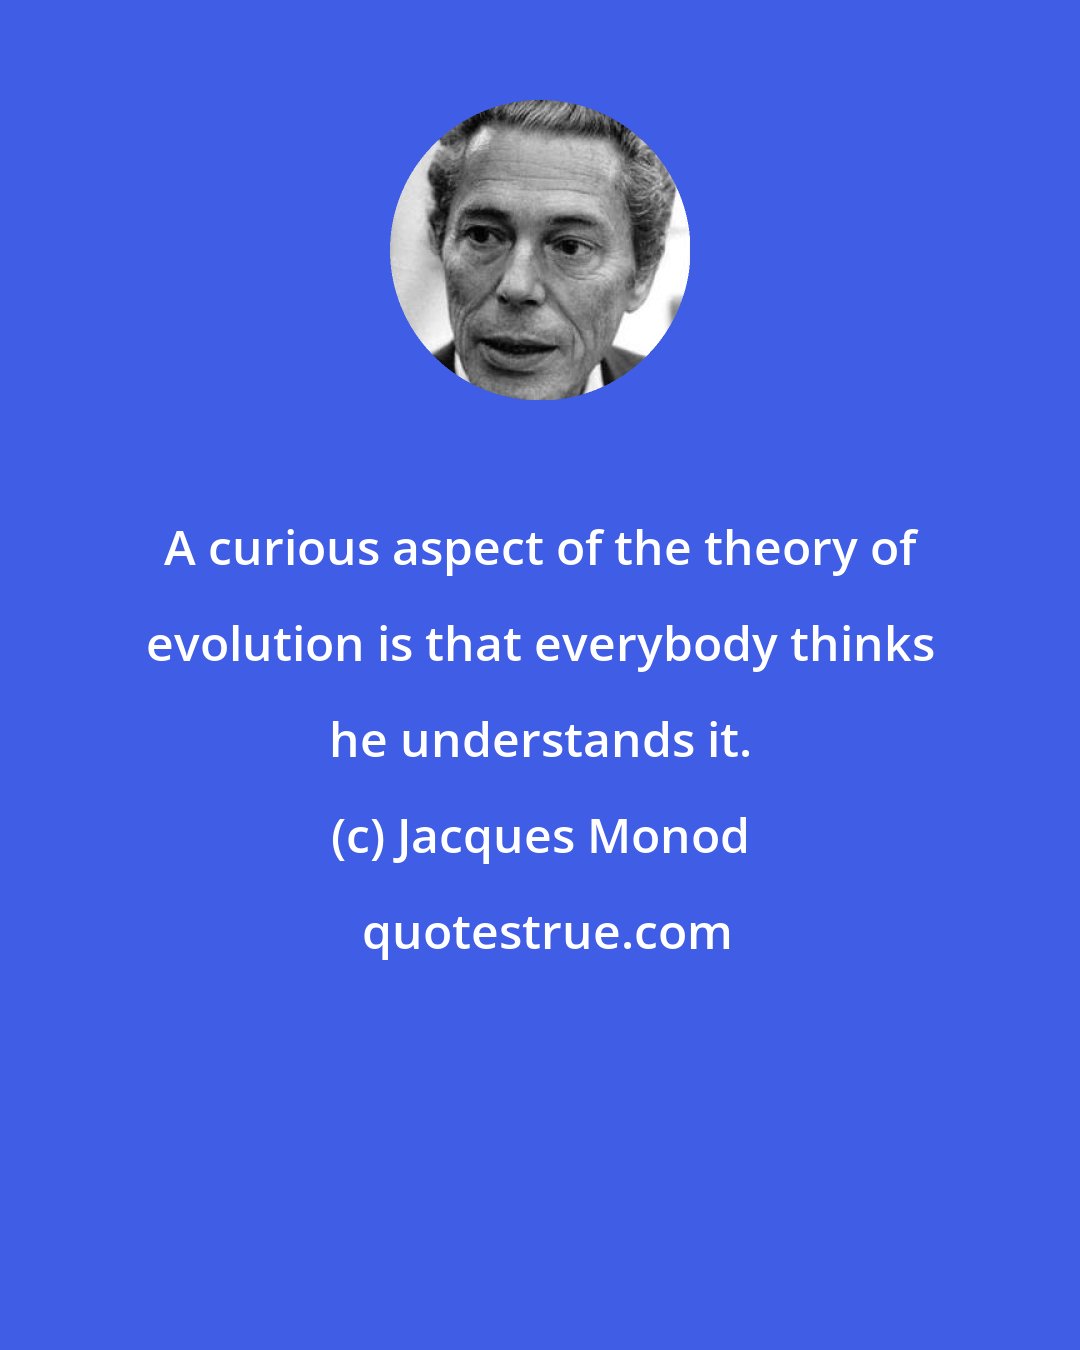 Jacques Monod: A curious aspect of the theory of evolution is that everybody thinks he understands it.